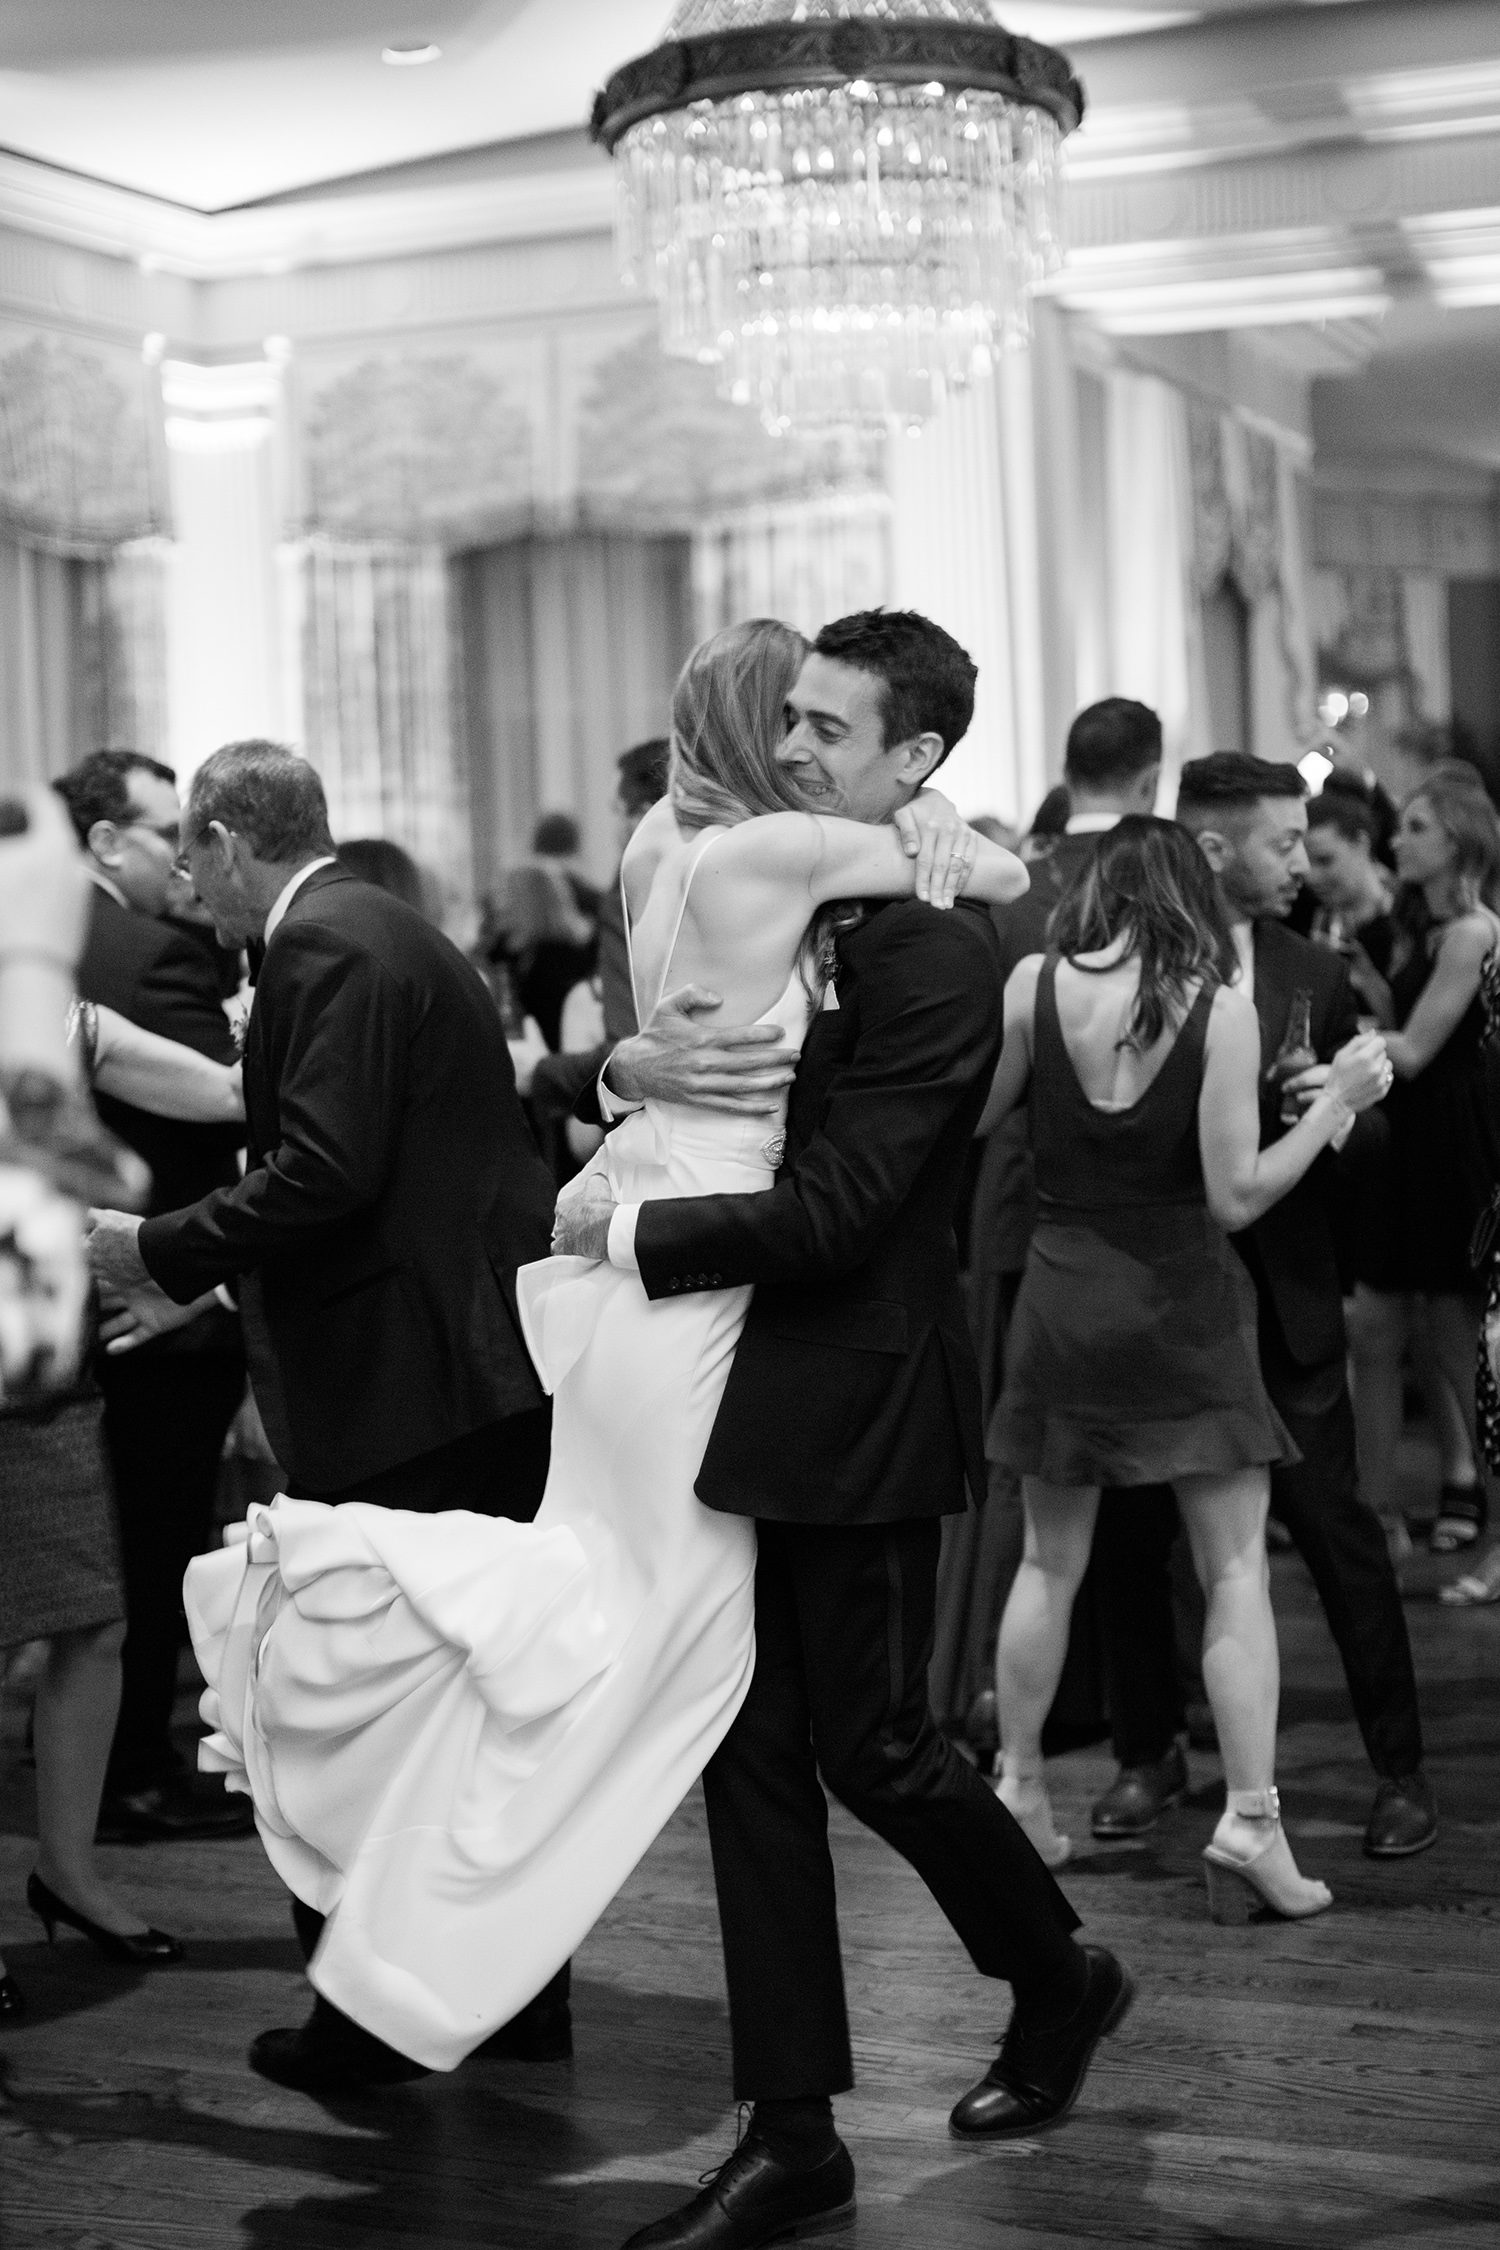 Black and white photo of bride and groom dancing after wedding